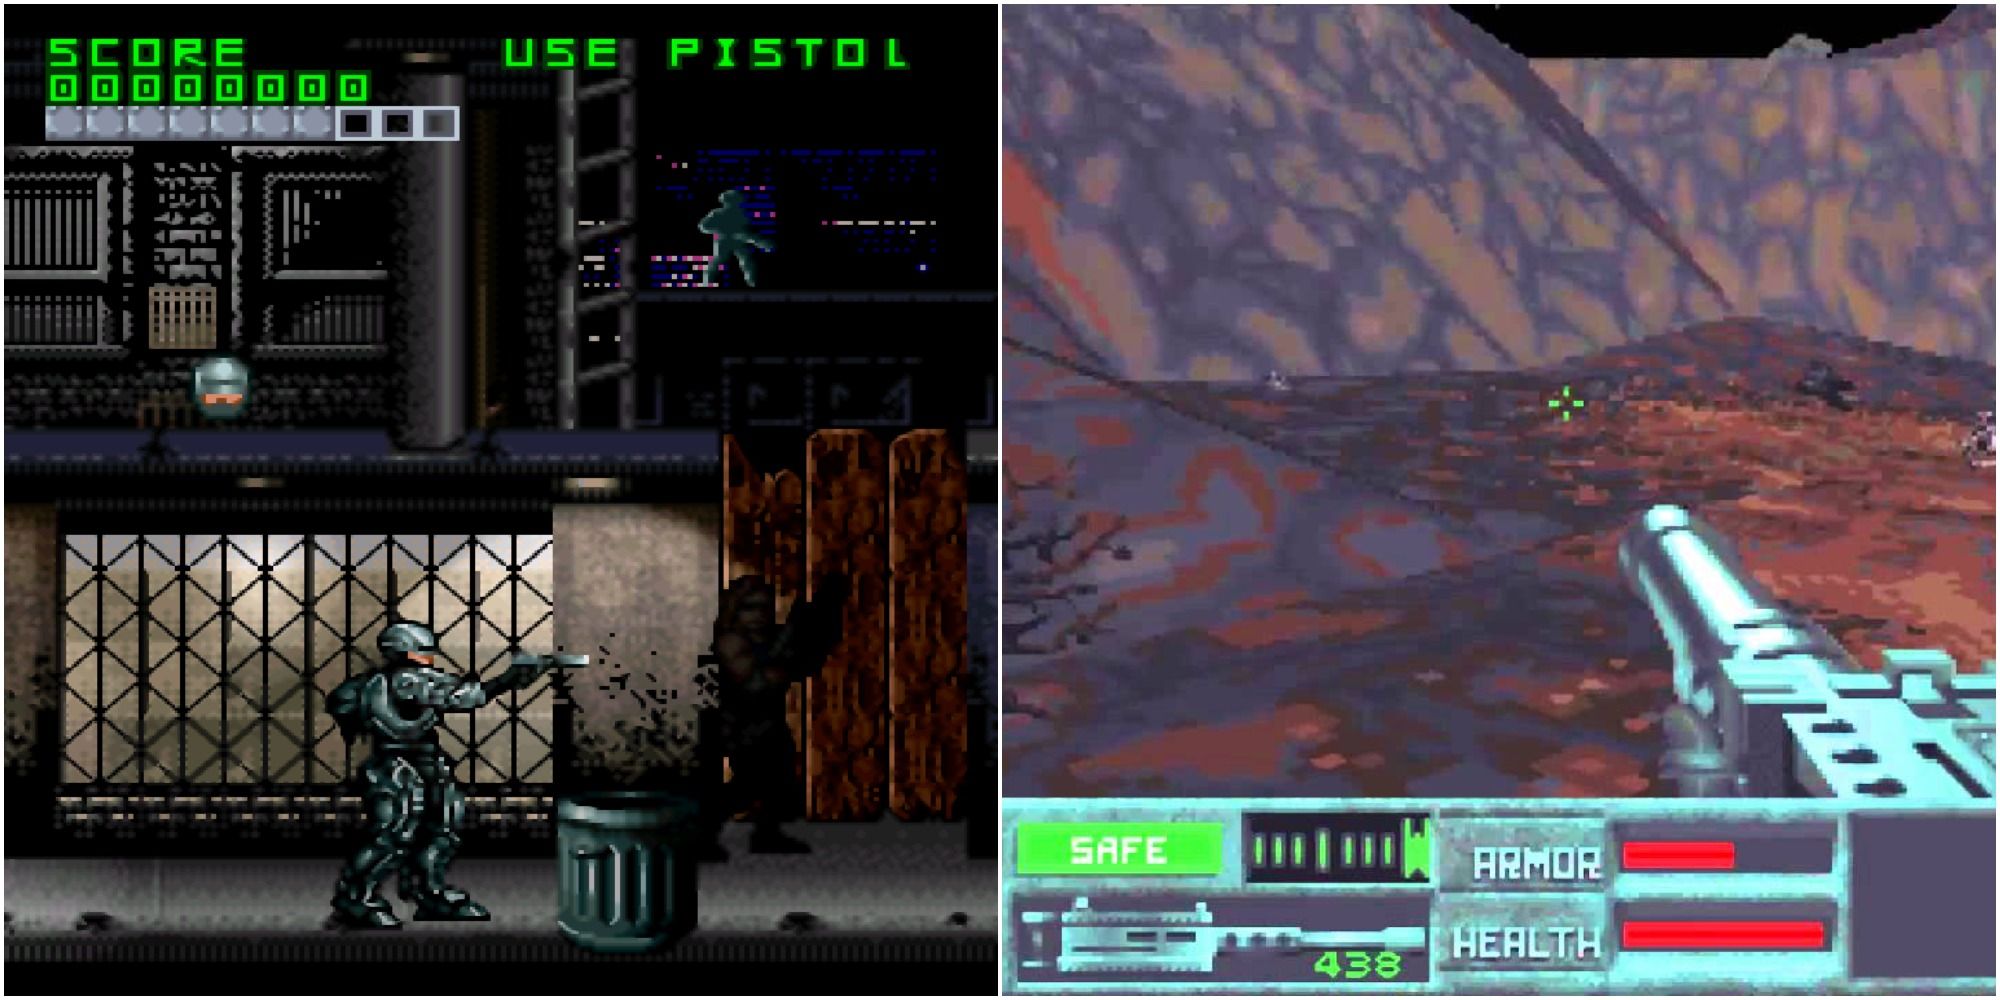 10 Best Video Games Based On The Terminator Franchise (That Are Super Underrated)